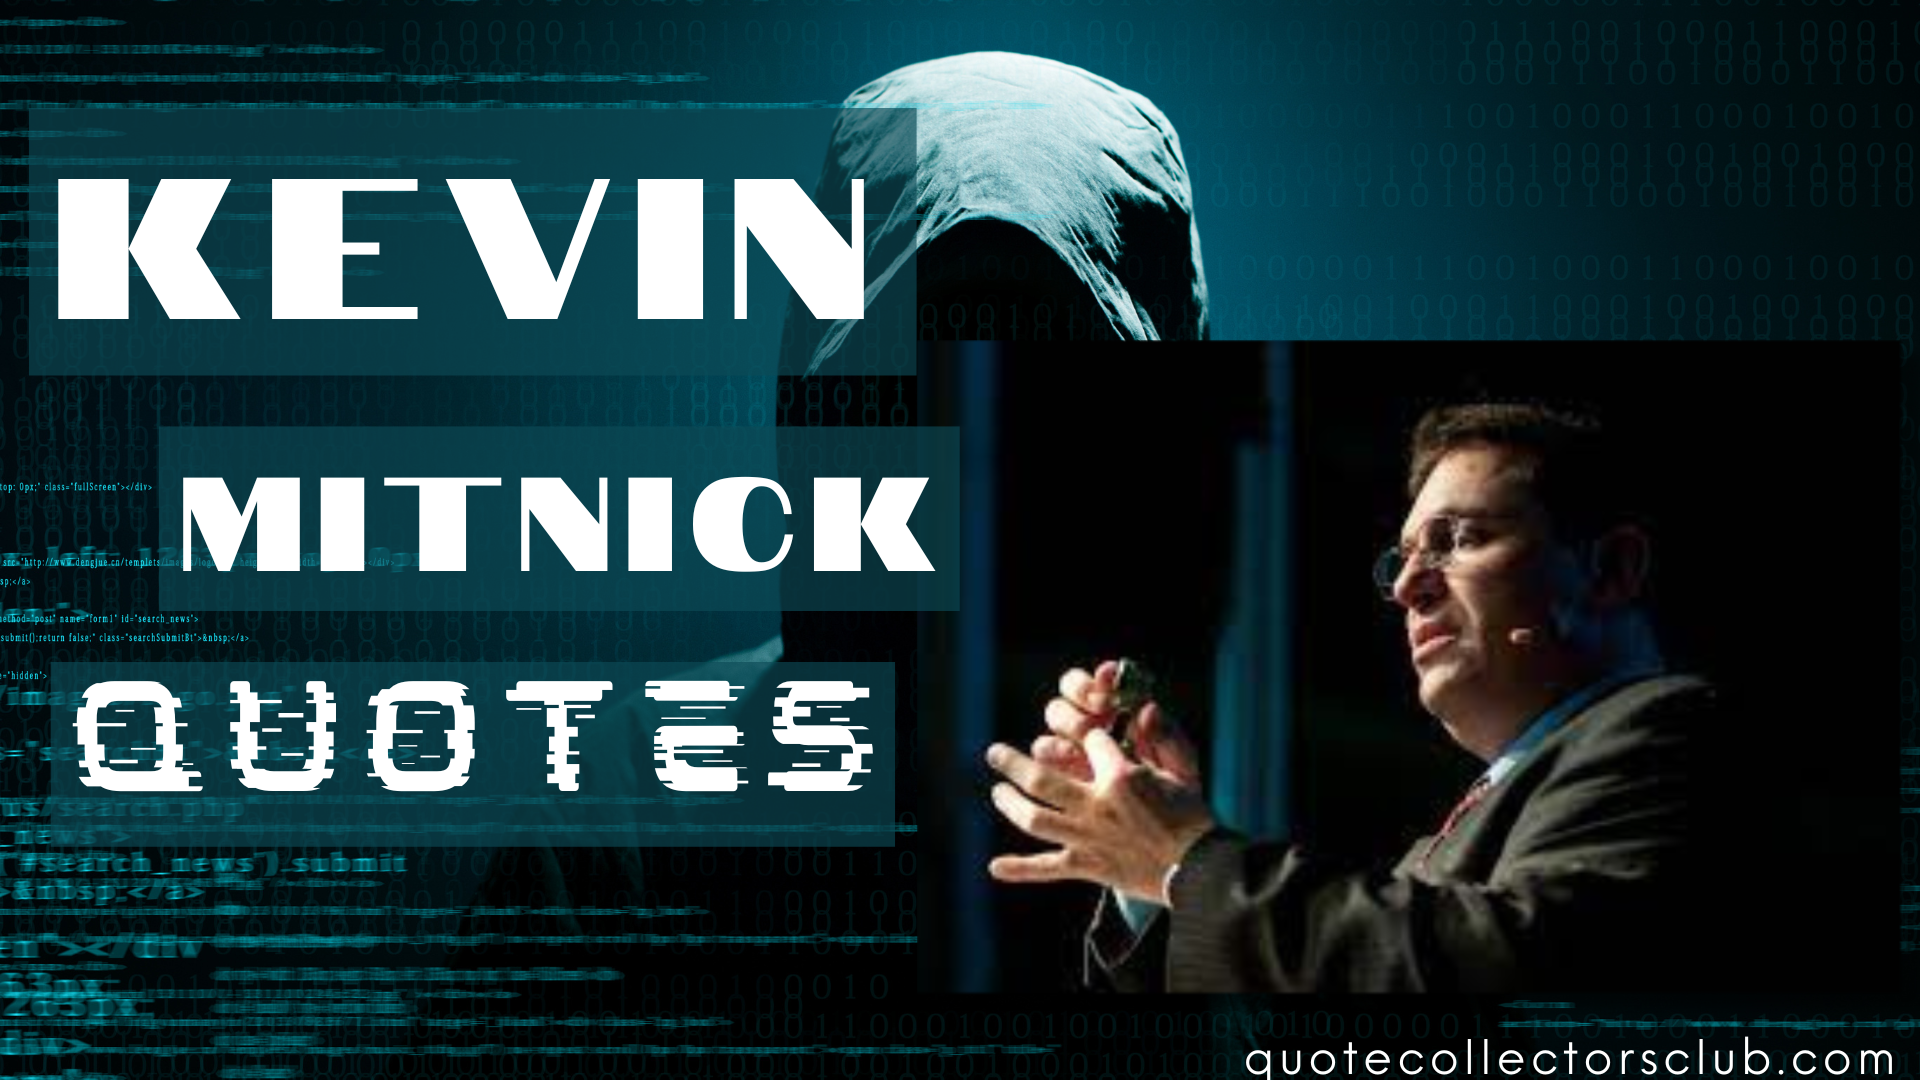 World's best hacker Kevin Mitnick Quotes on social engineering, life